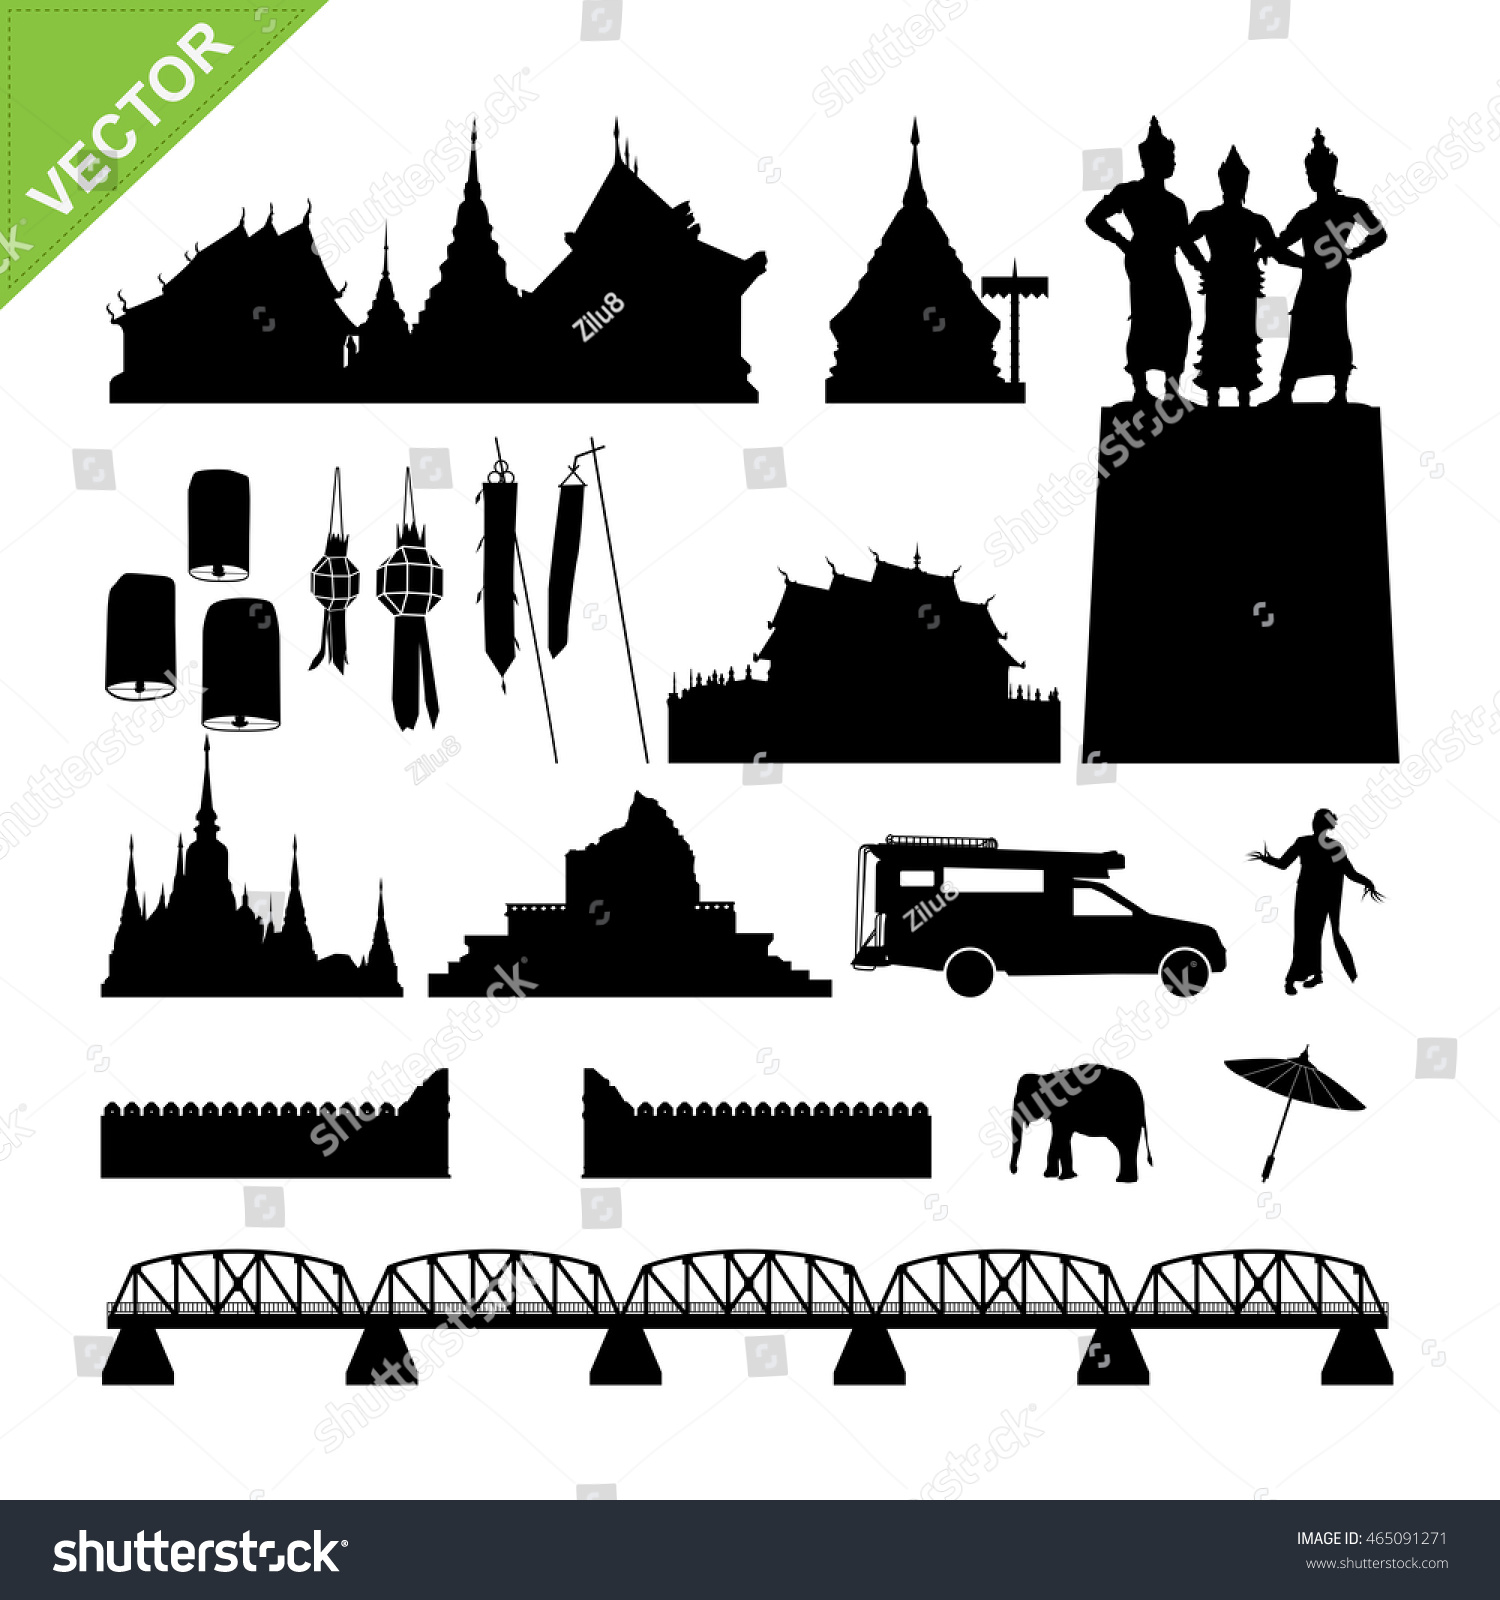 SVG of Chiang Mai symbol and landmark silhouettes vector svg